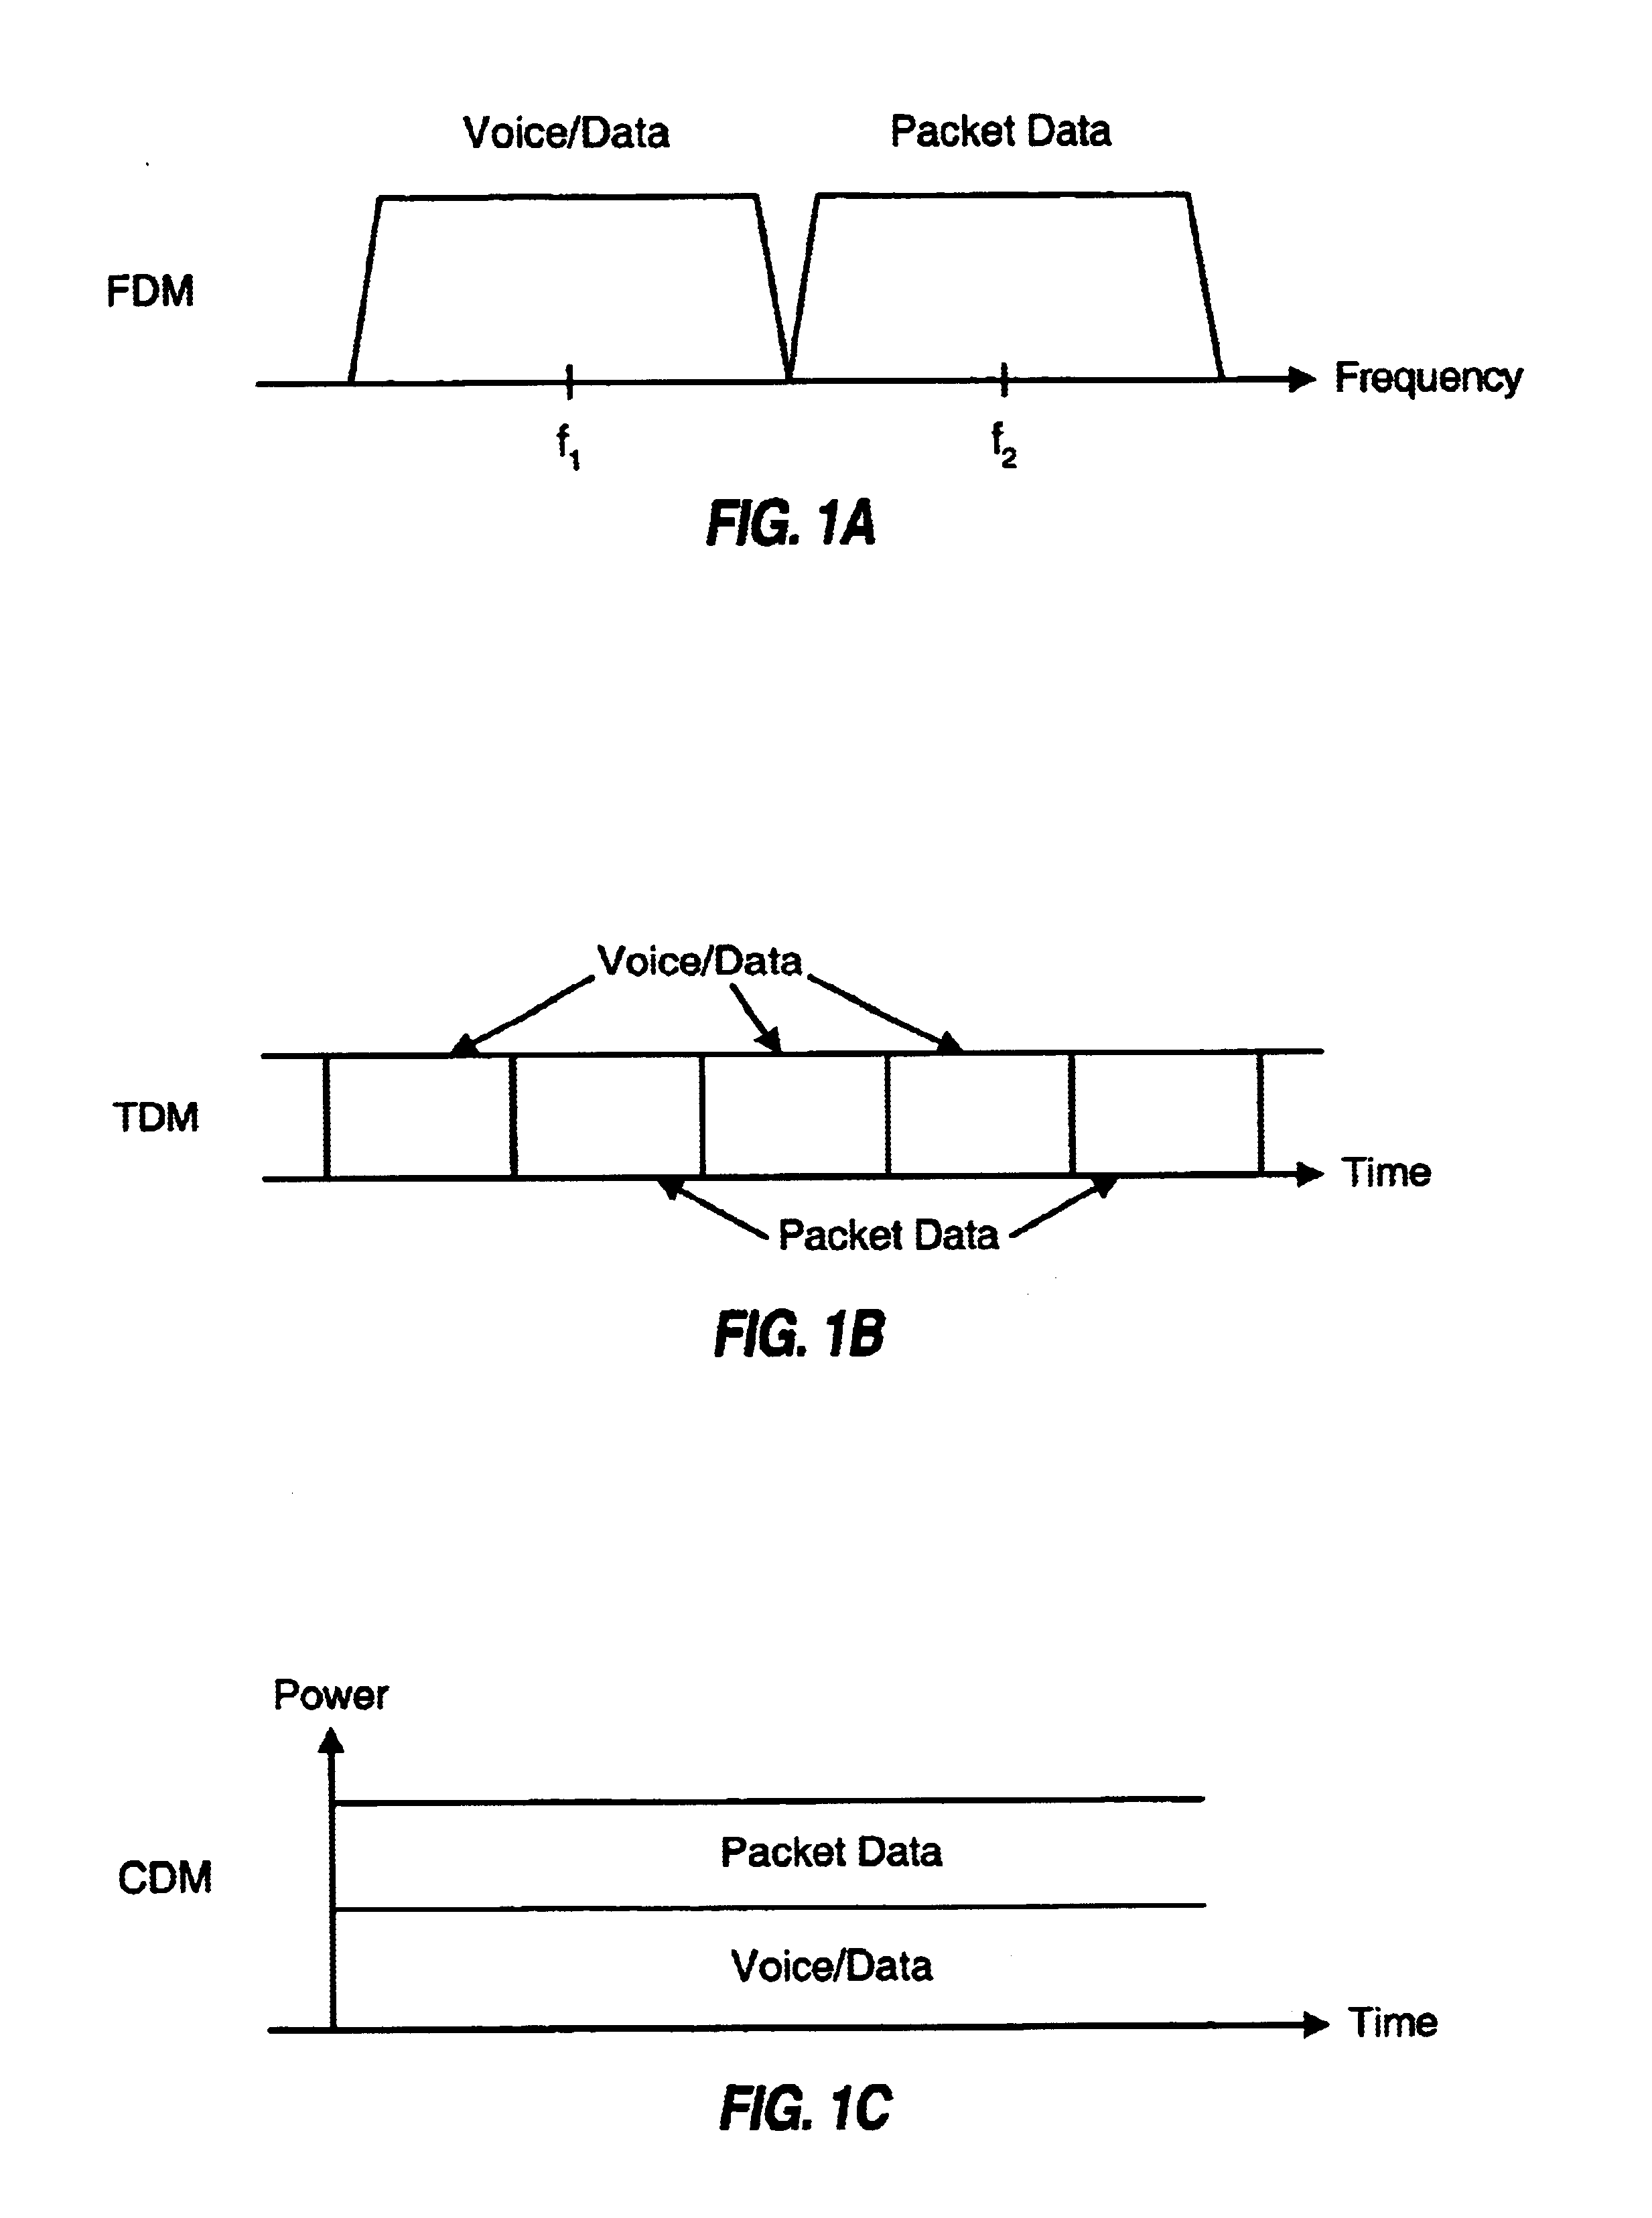 Method and apparatus for multiplexing high-speed packet data transmission with voice/data transmission